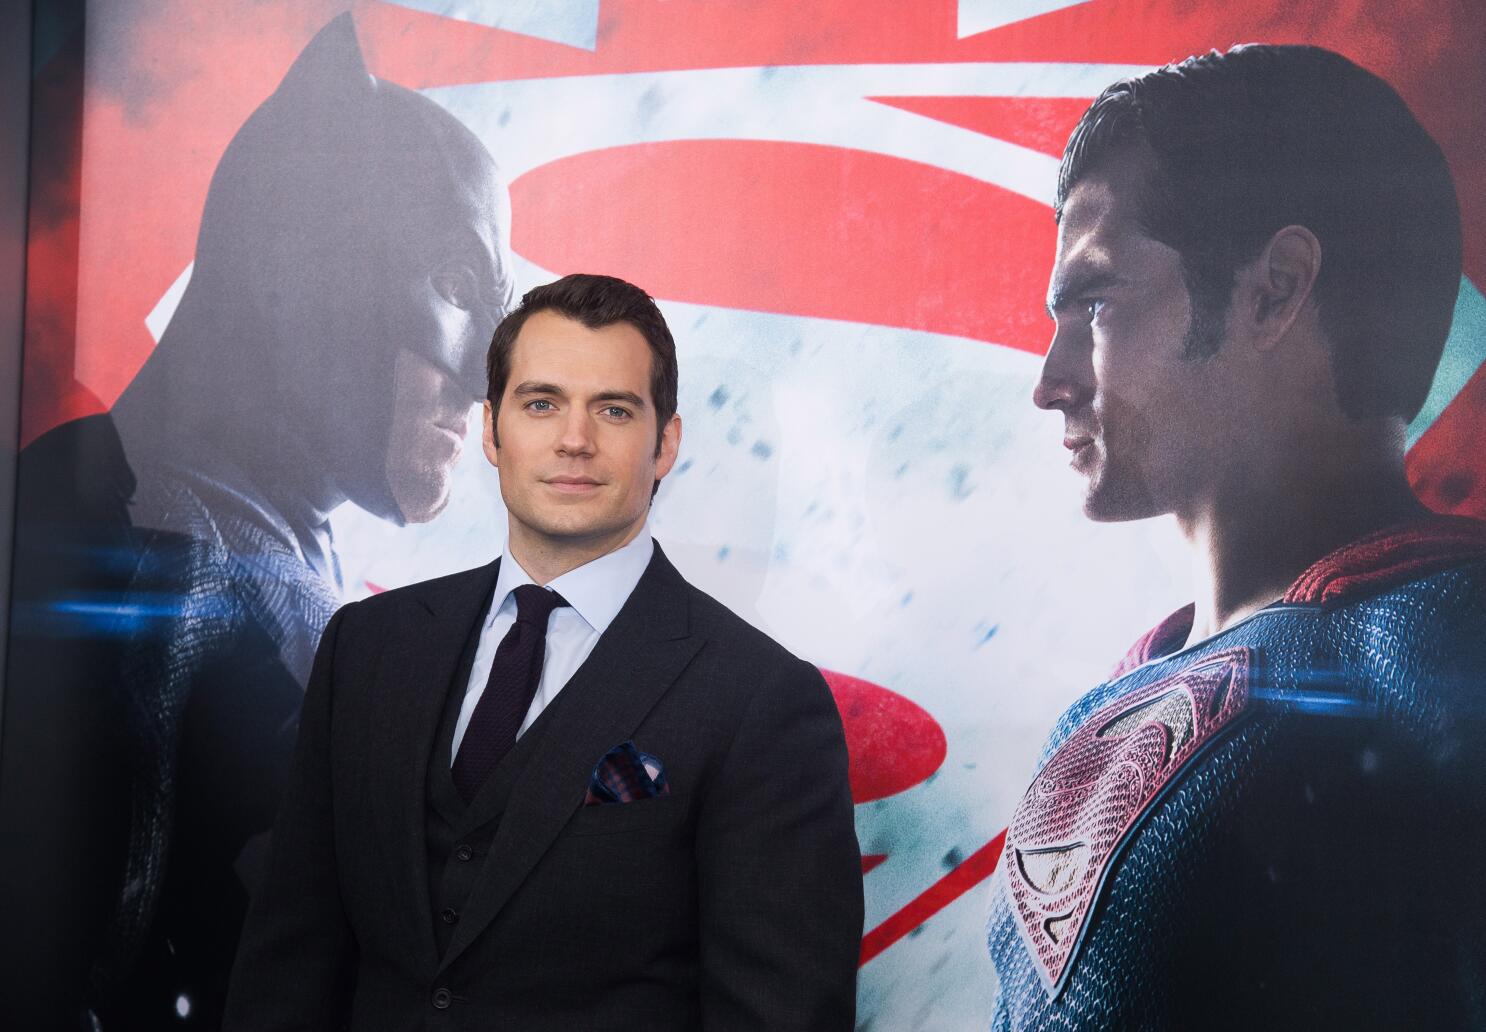 Henry Cavill was not fired. Henry was just not hired to be